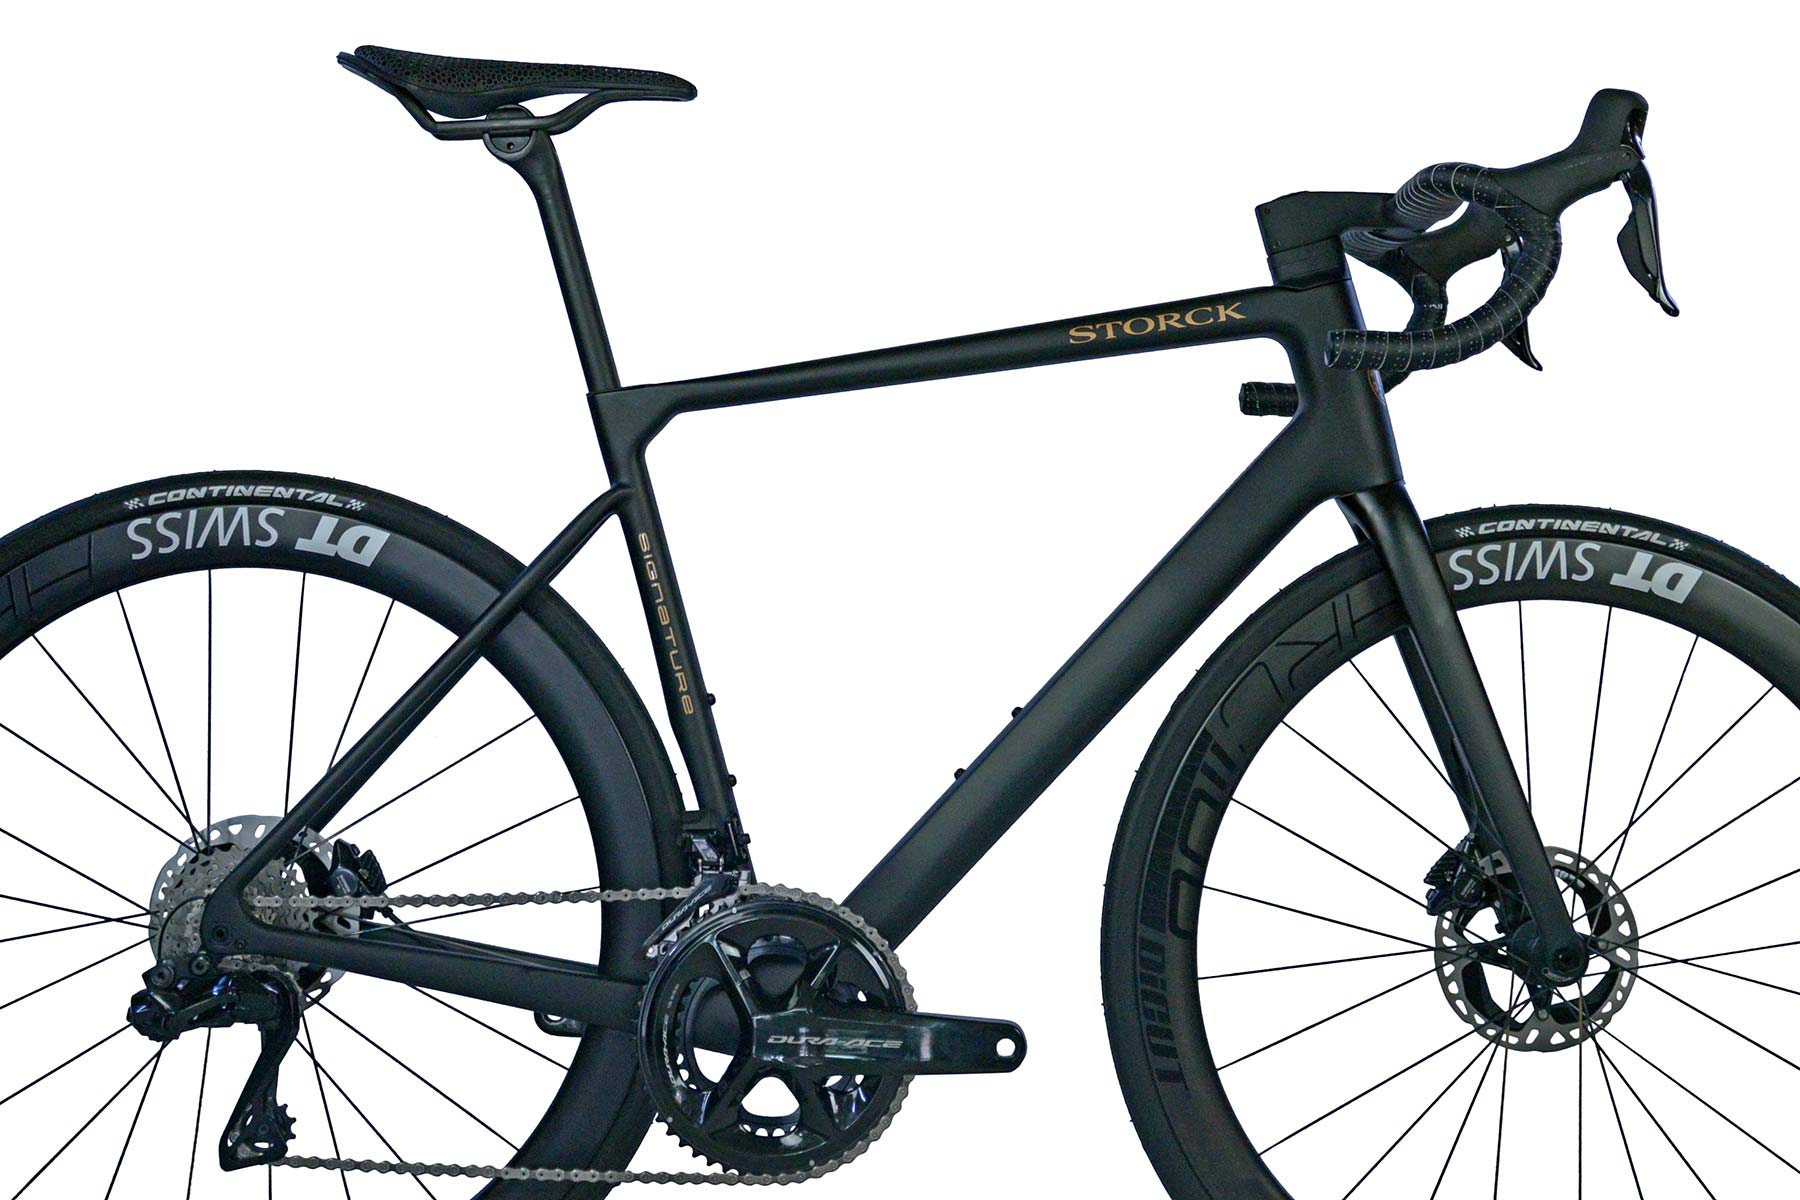 Storck Aernario 3 Signature Disc limited edition ultralight carbon all-rounder lightweight road bike, frame